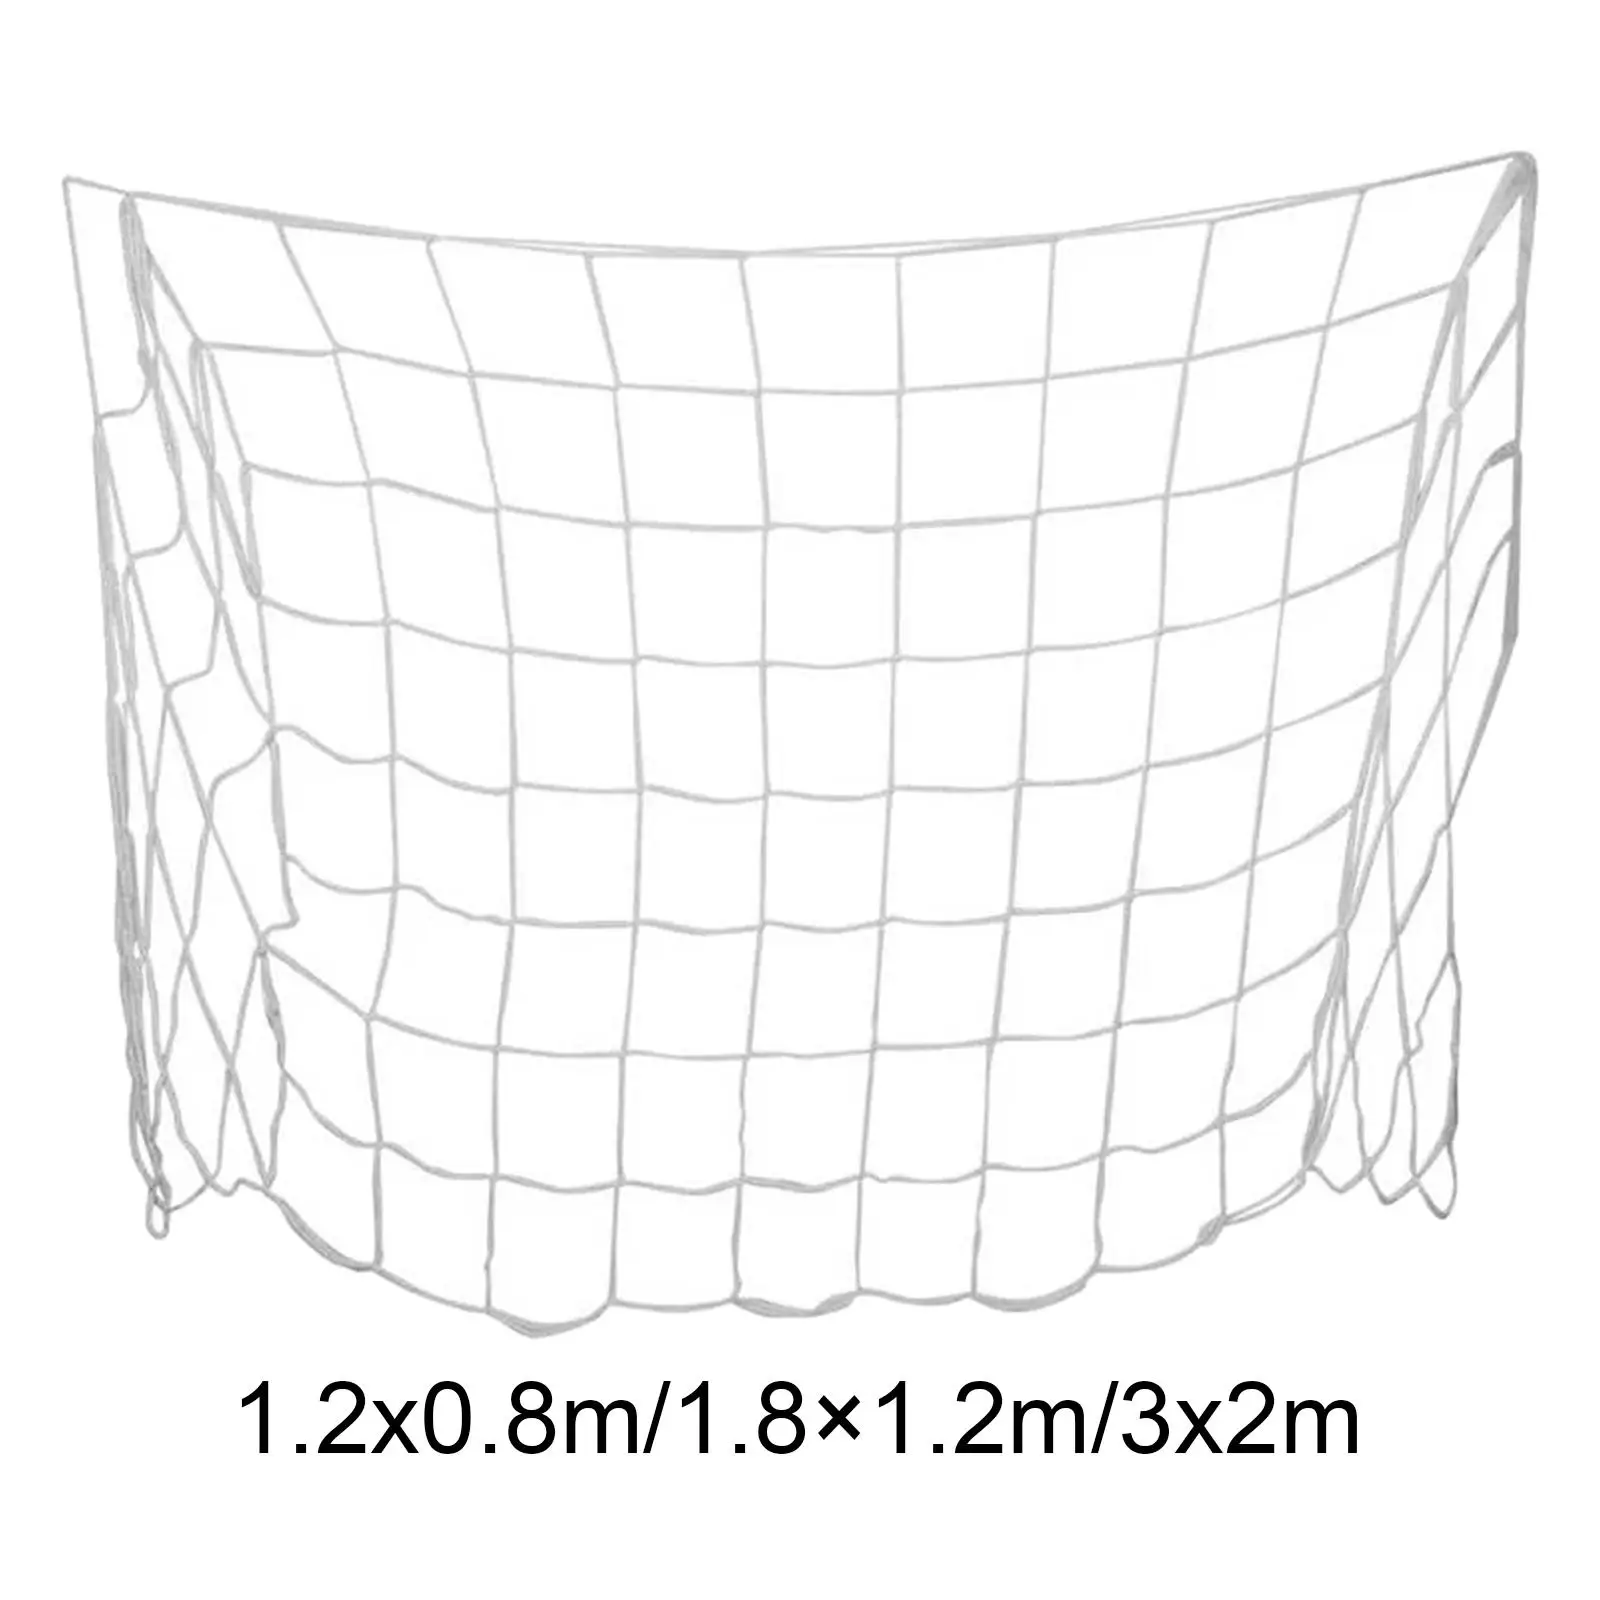 Soccer Goal Net Replacement Netting Accessories Football Net for Training